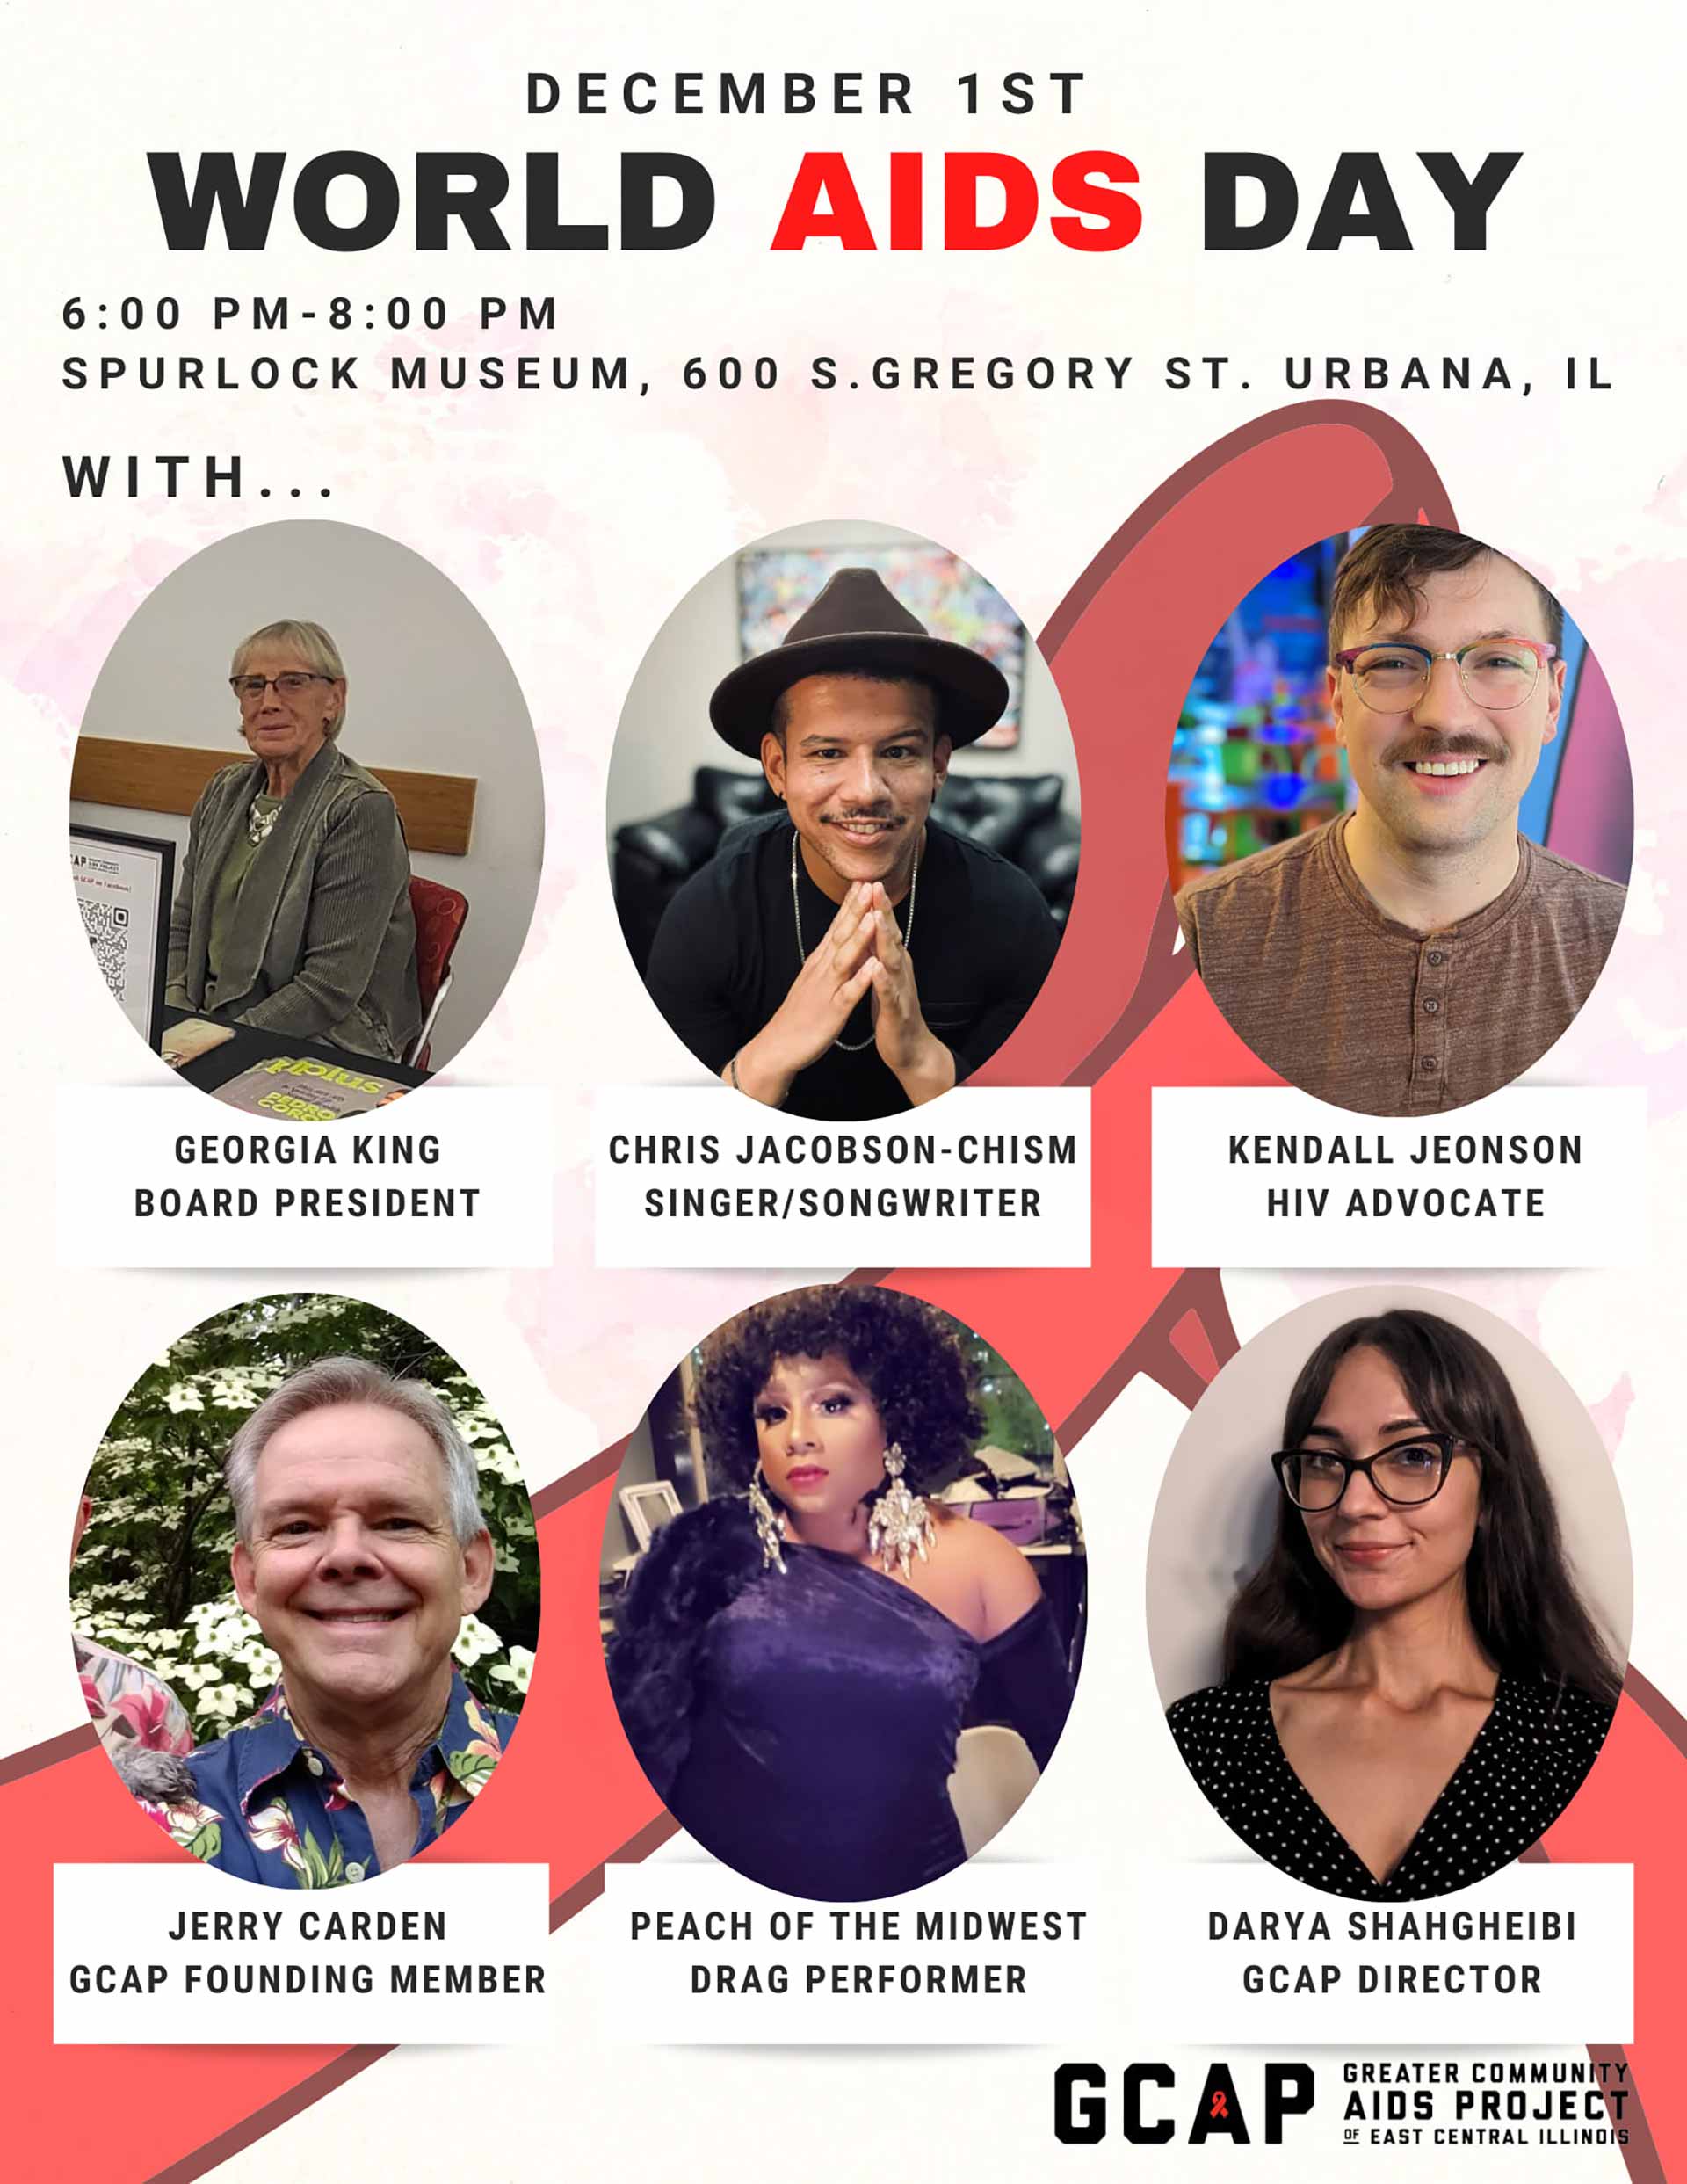 event flyer with headshots of collaborators: georgia king, chris jacobson-chism, kendall jeonson, jerry carden, peach of the midwest, and darya shahgheibi